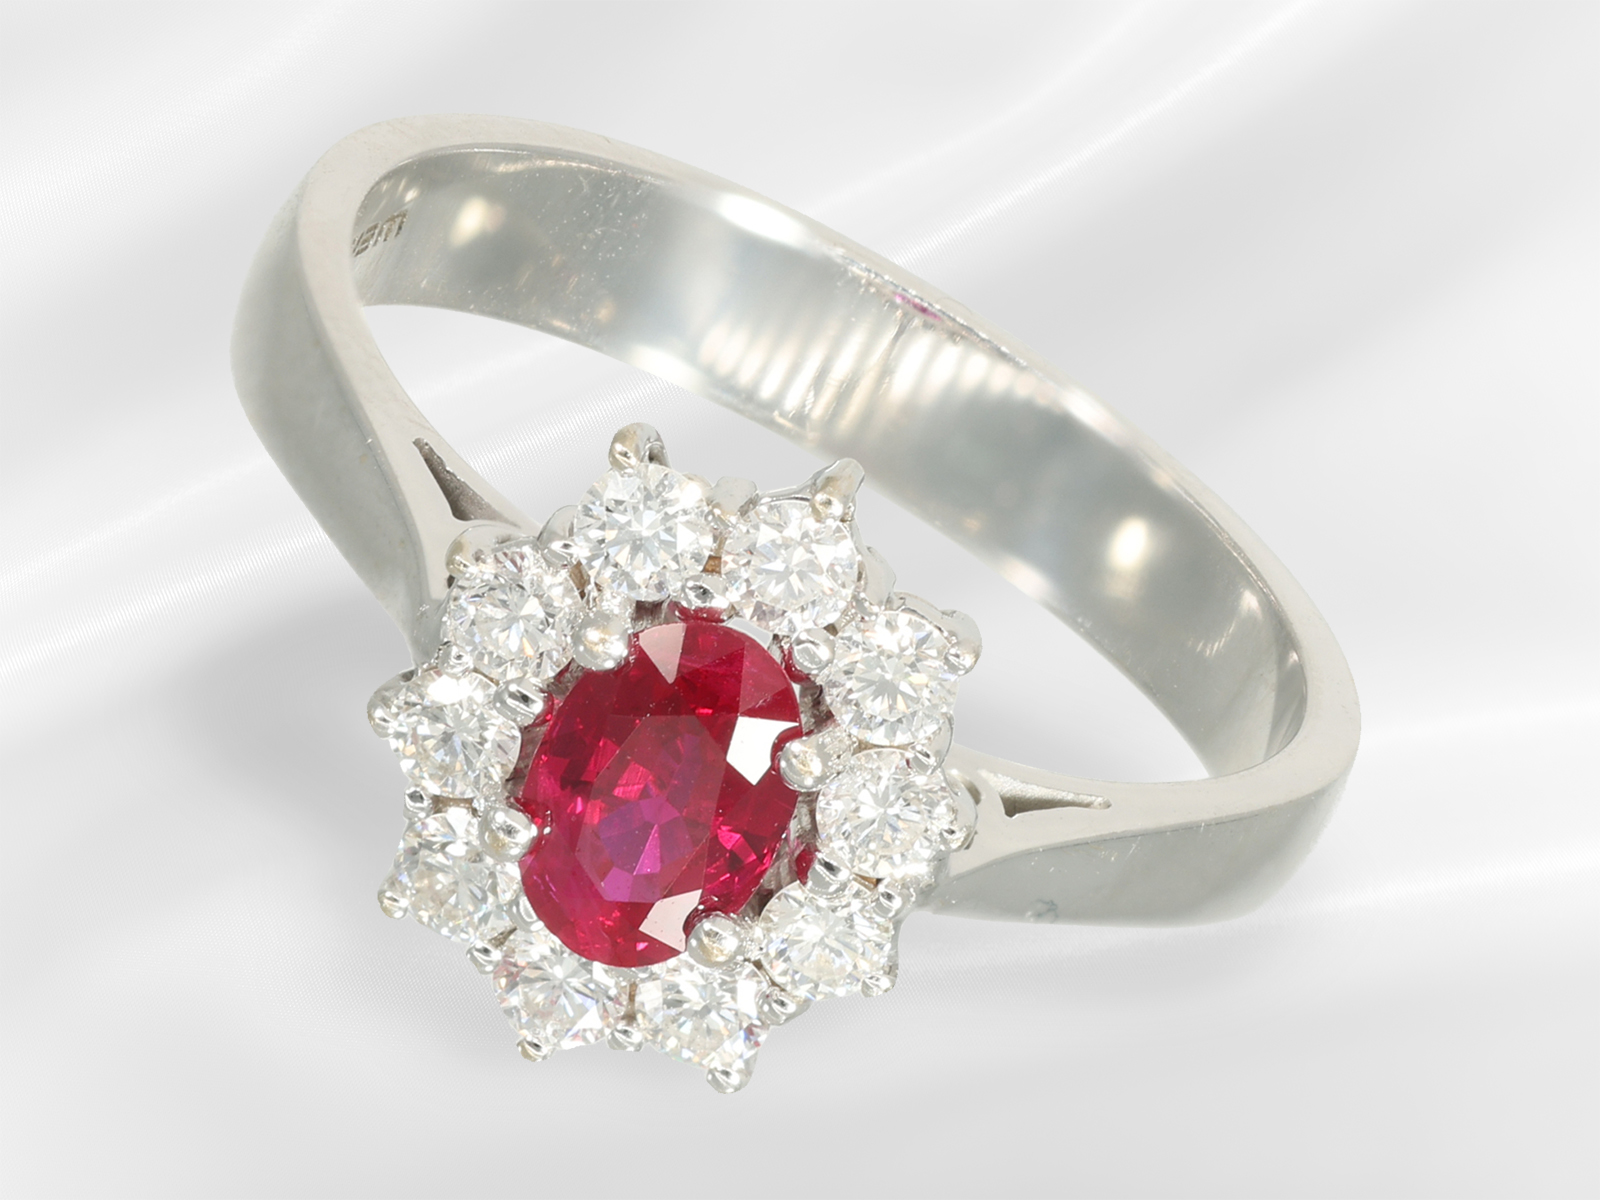 Ring: very fine ruby/brilliant-cut diamond gold ring from Wempe, approx. 1ct gemstone setting